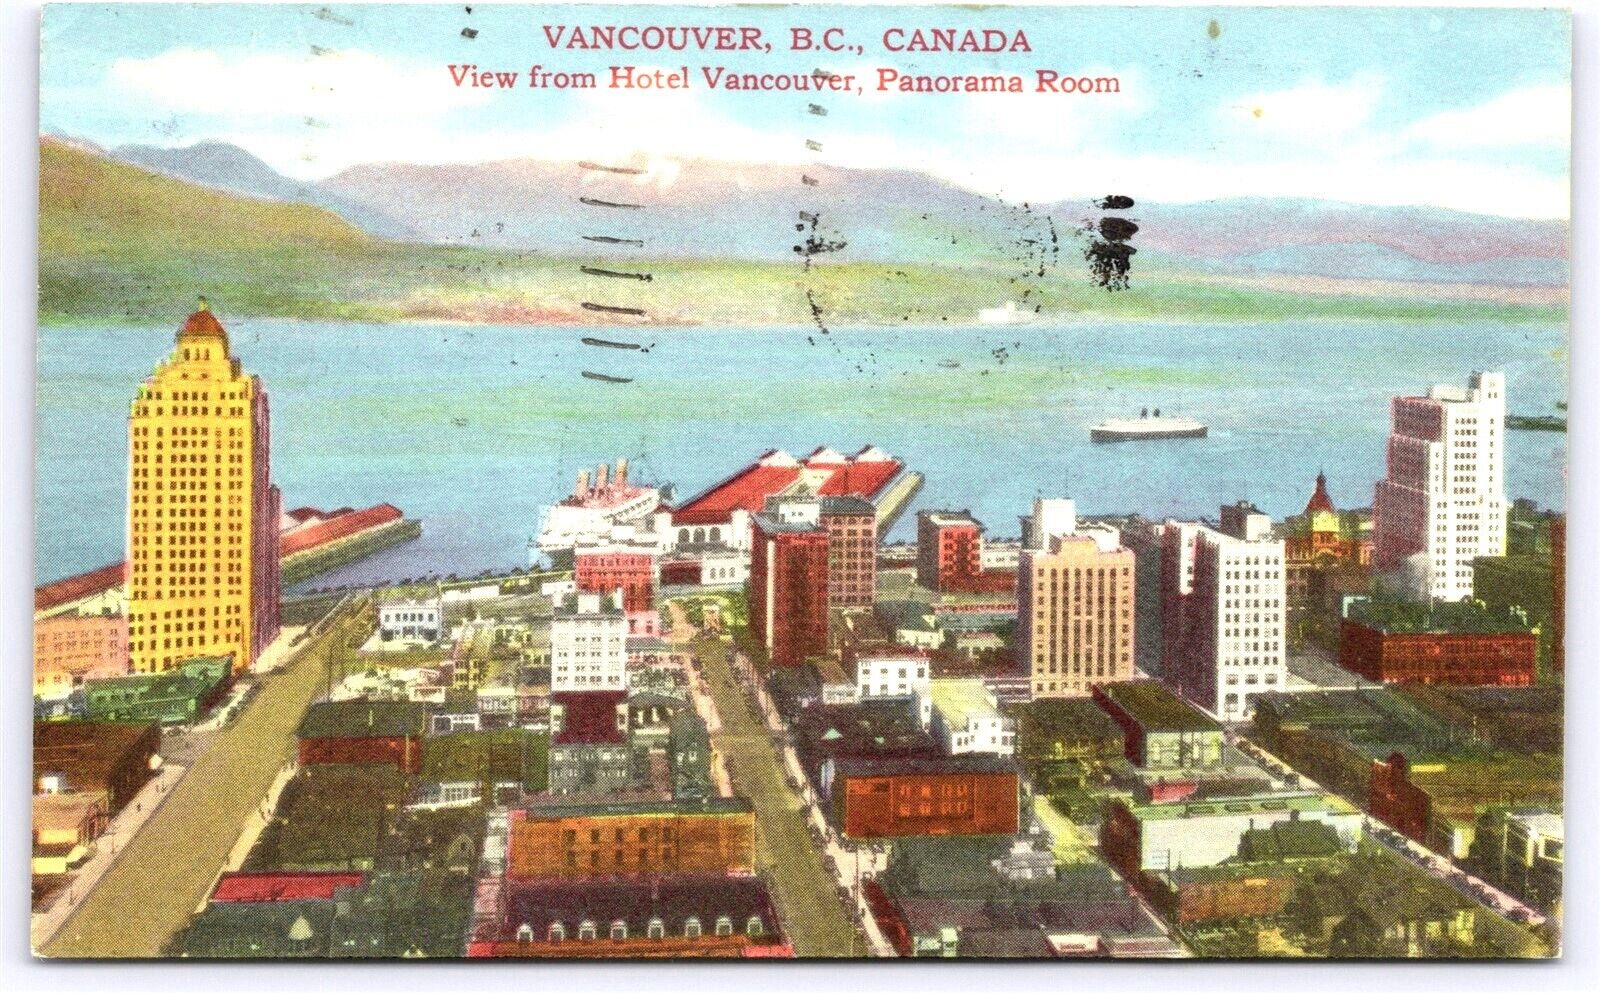 Canada, Vancouver BC, Aerial View from Hotel Vancouver Panorama Room, DB 1949